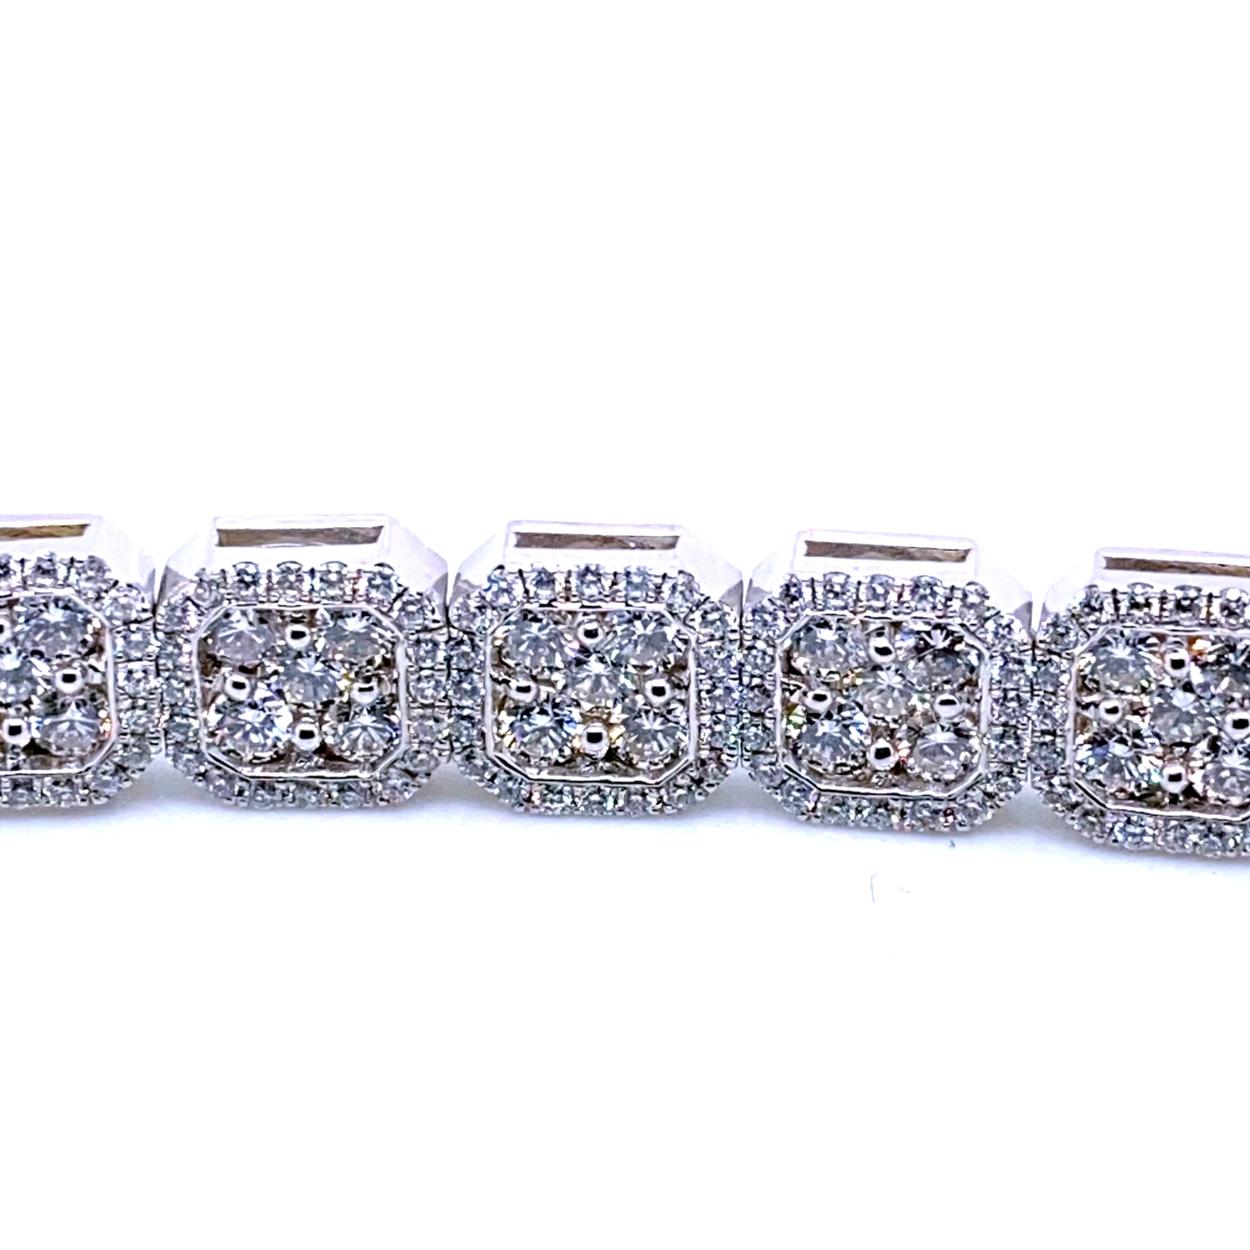 10.65 Carat Pave Set 14K Gold Diamond Tennis Bracelet with Cluster Set Links In New Condition For Sale In Los Angeles, CA